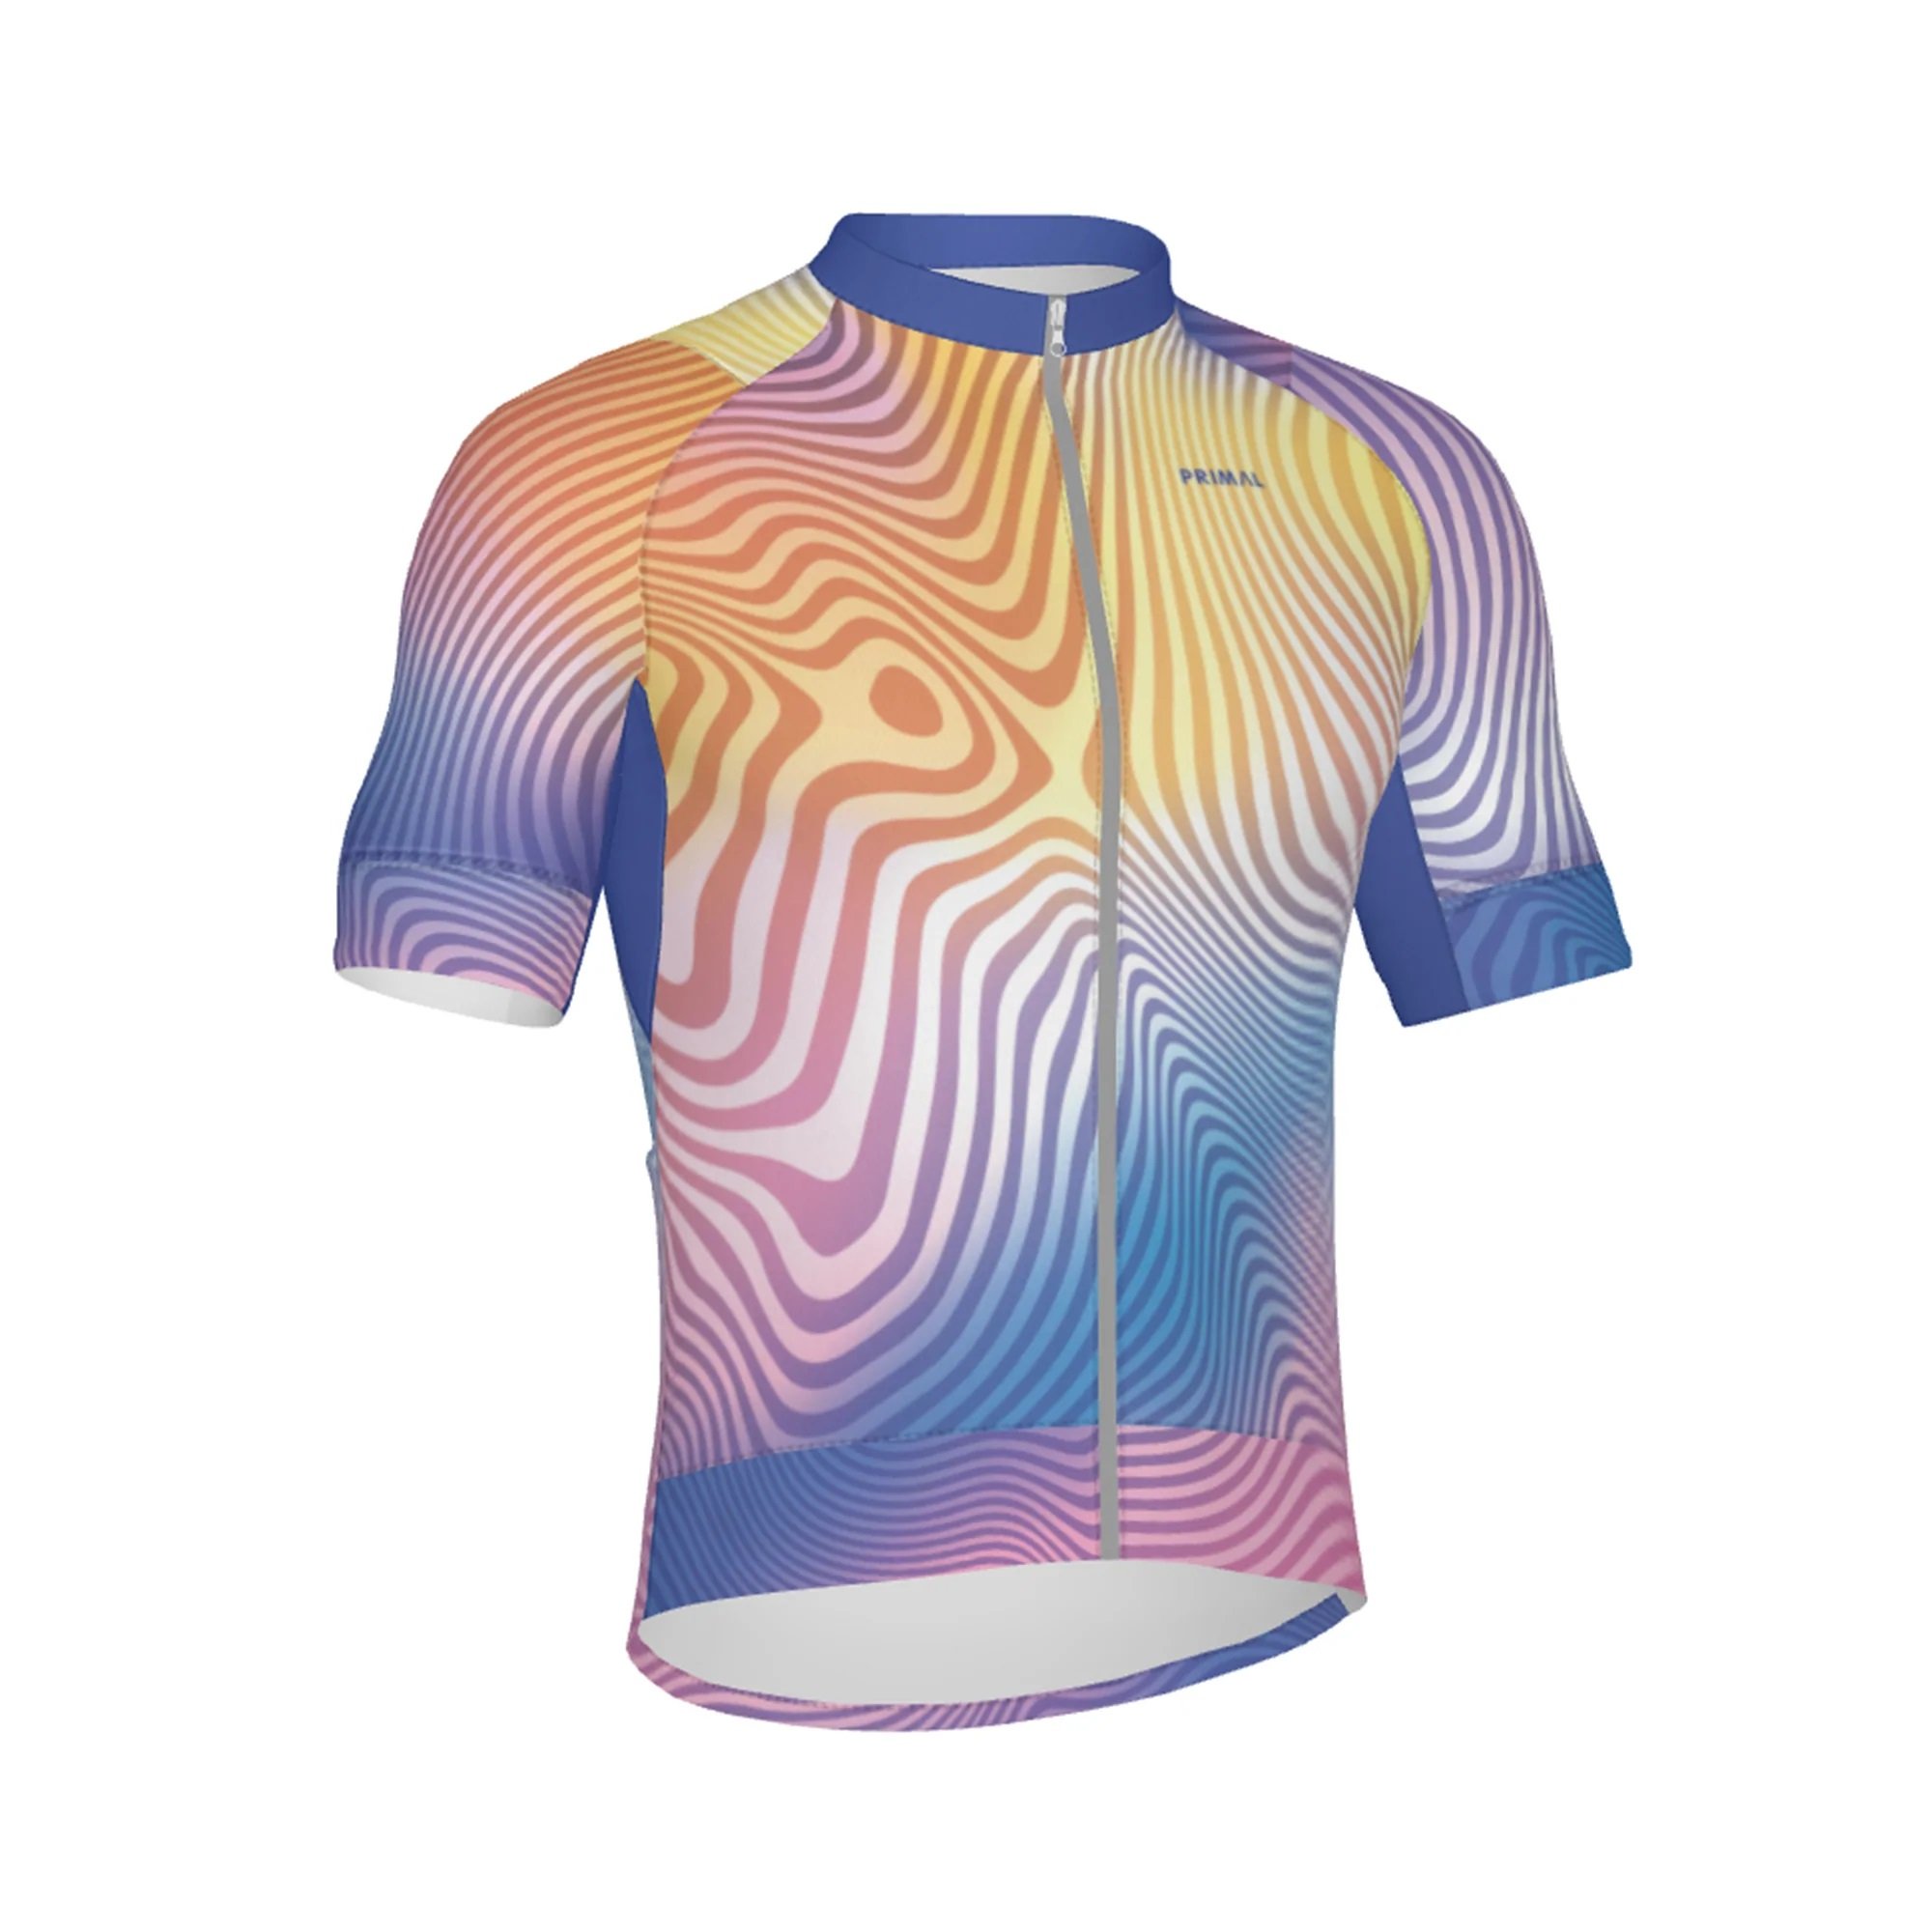 Sonic Barrier Men's Equinox Cycling Jersey by Primal